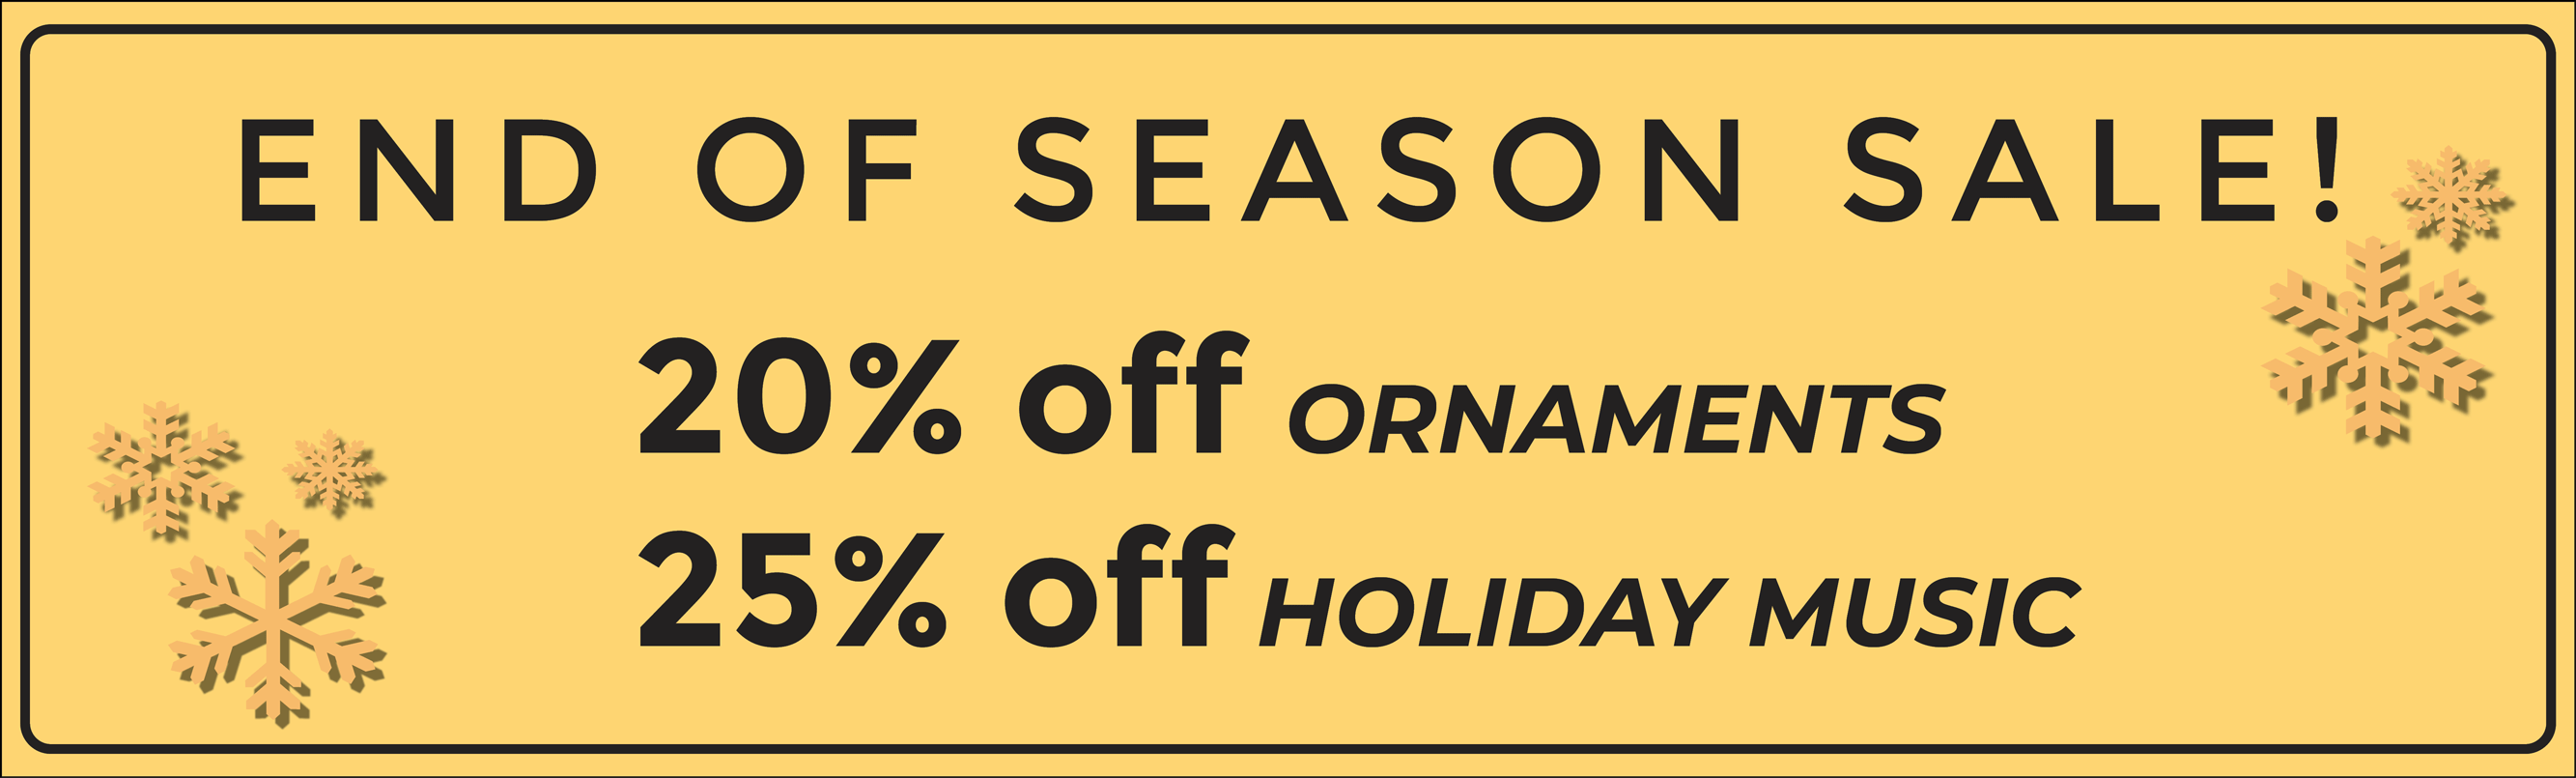 End of Season Sale 20% off ornaments 25% off print music